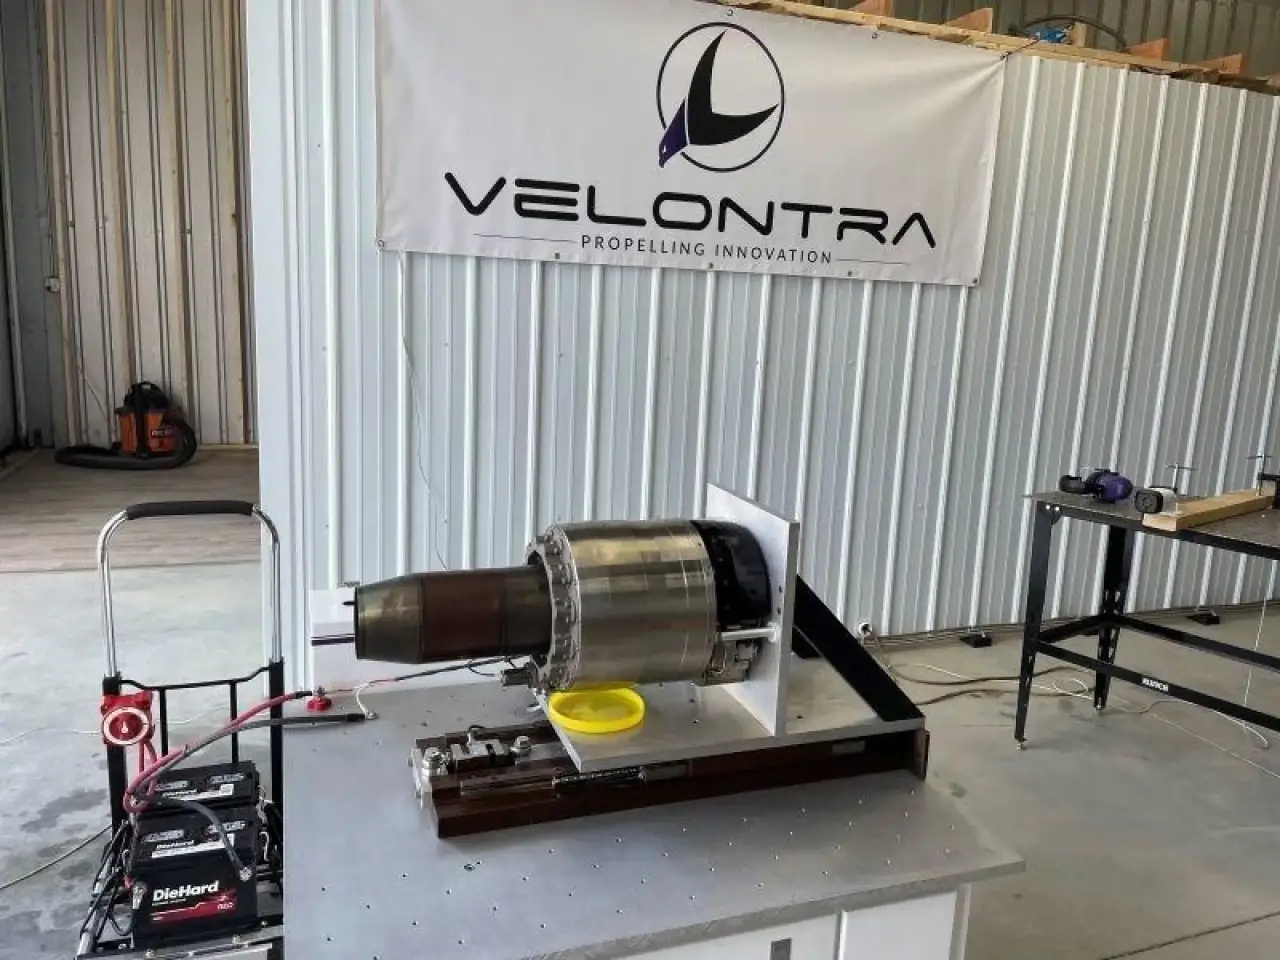 Velontra Contracts with Venus Aerospace to Deliver a Propulsion System Enabling Airflights